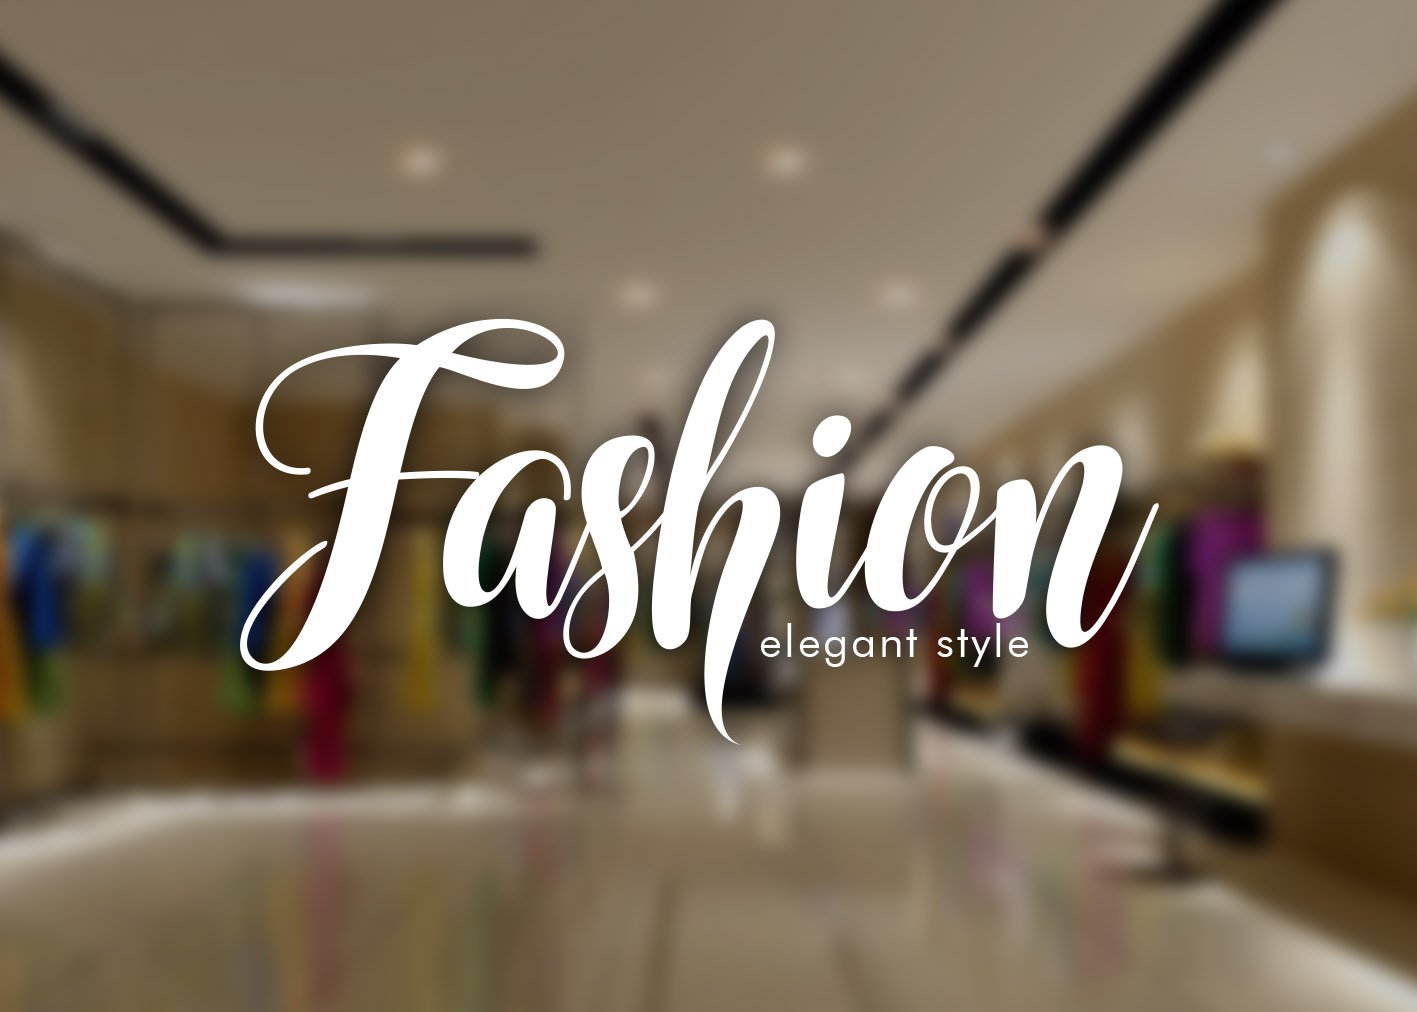 The word fashion is written in a trendy font.